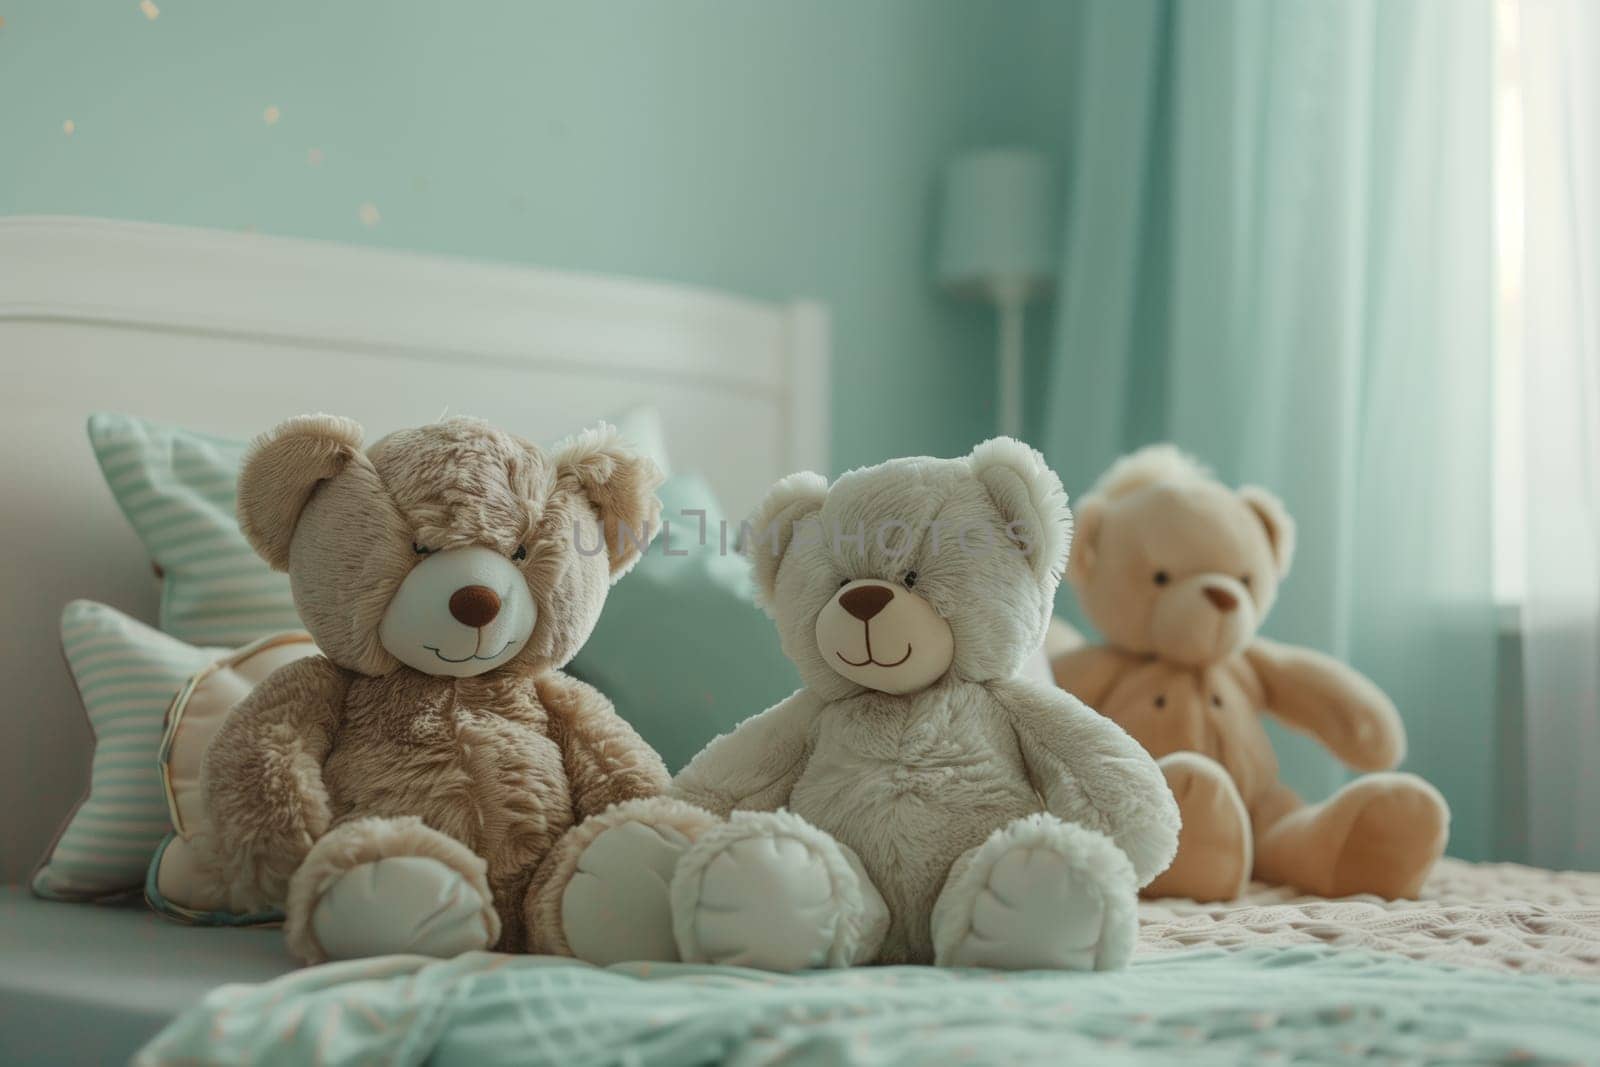 Three teddy bears rest on a plush bed in a cozy room by richwolf